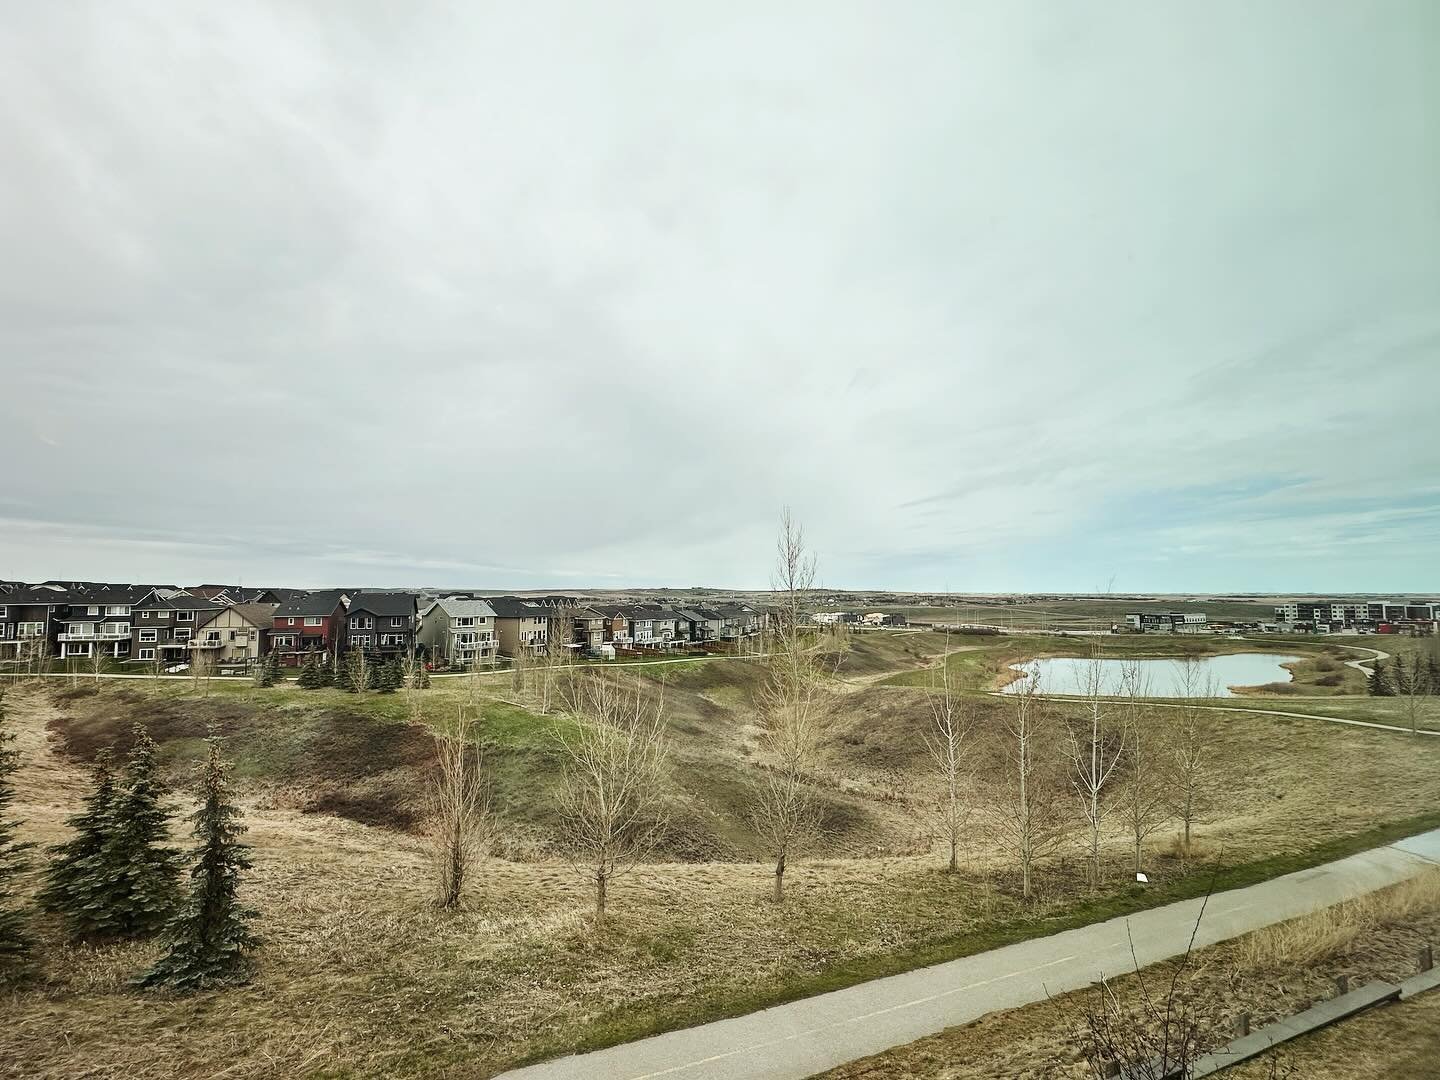 It is a week of amazing views!

This wide view is like an extended backyard and so much more.

Preparing this unit in Nolan Hill for sale, offering my expert home staging advice.

Three bedrooms, developed basement and two laundry rooms! Excellent

L